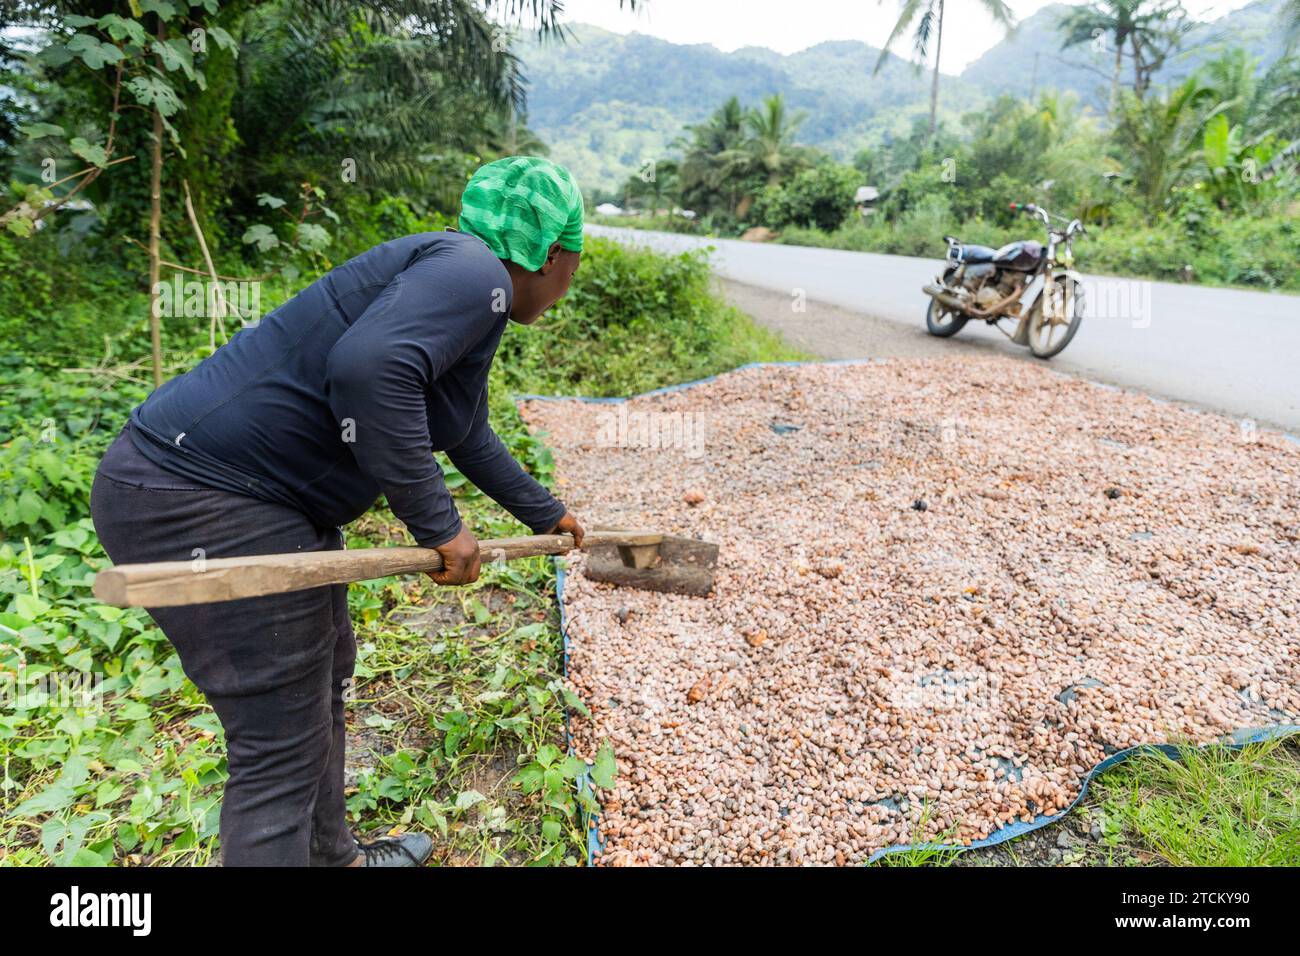 A peasant woman puts some cocoa beans to dry, production of chocolate in Cameroon. Stock Photo